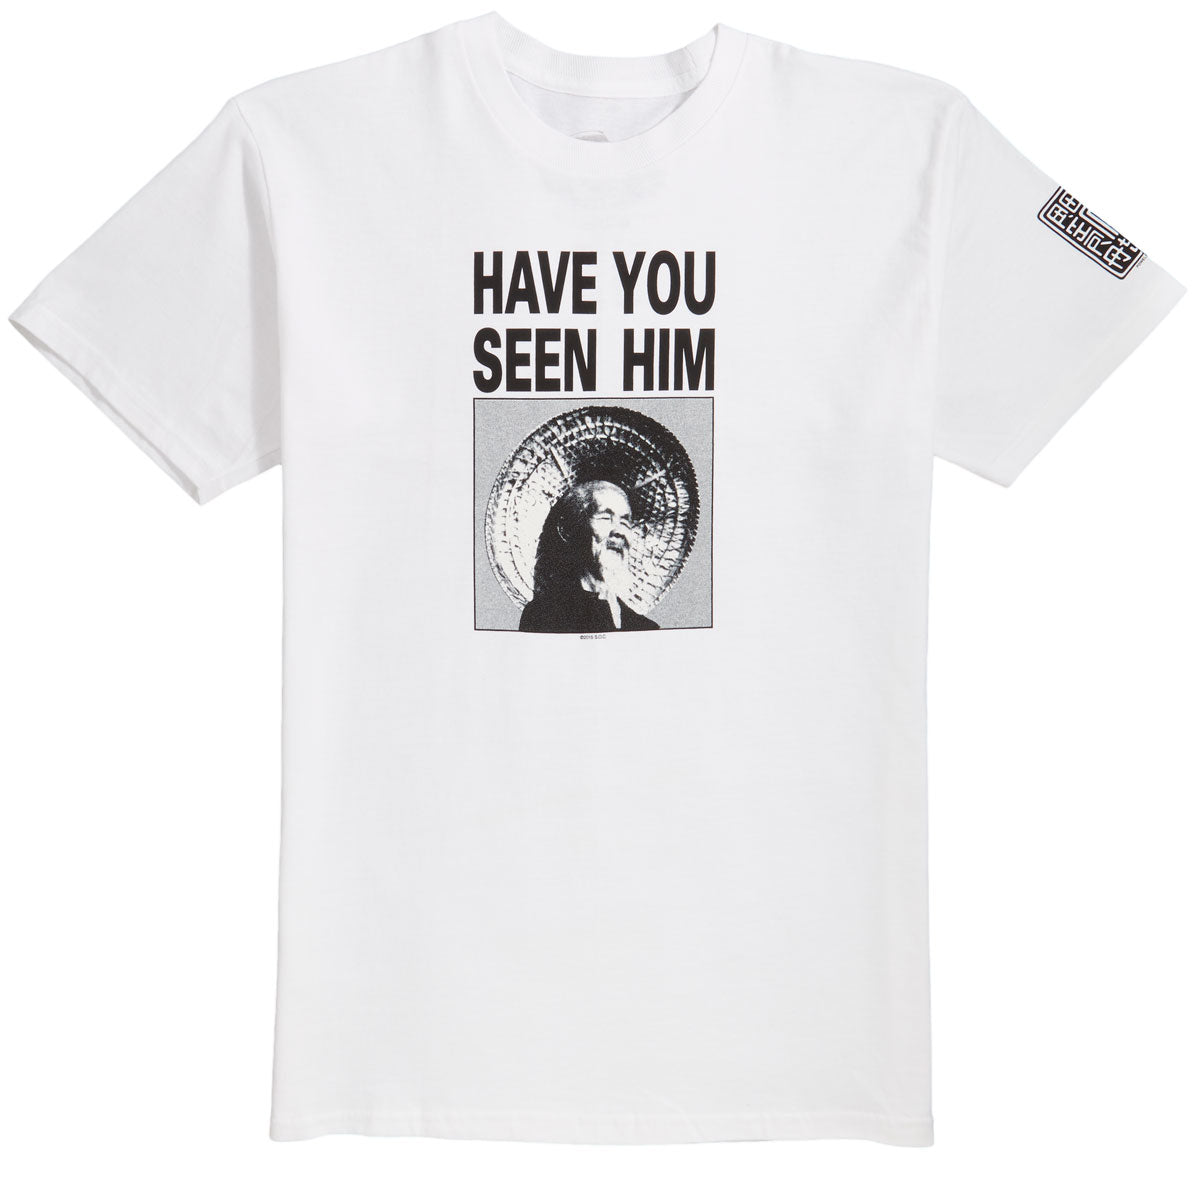 Powell-Peralta Animal Chin Have You Seen Him T-Shirt - White image 1